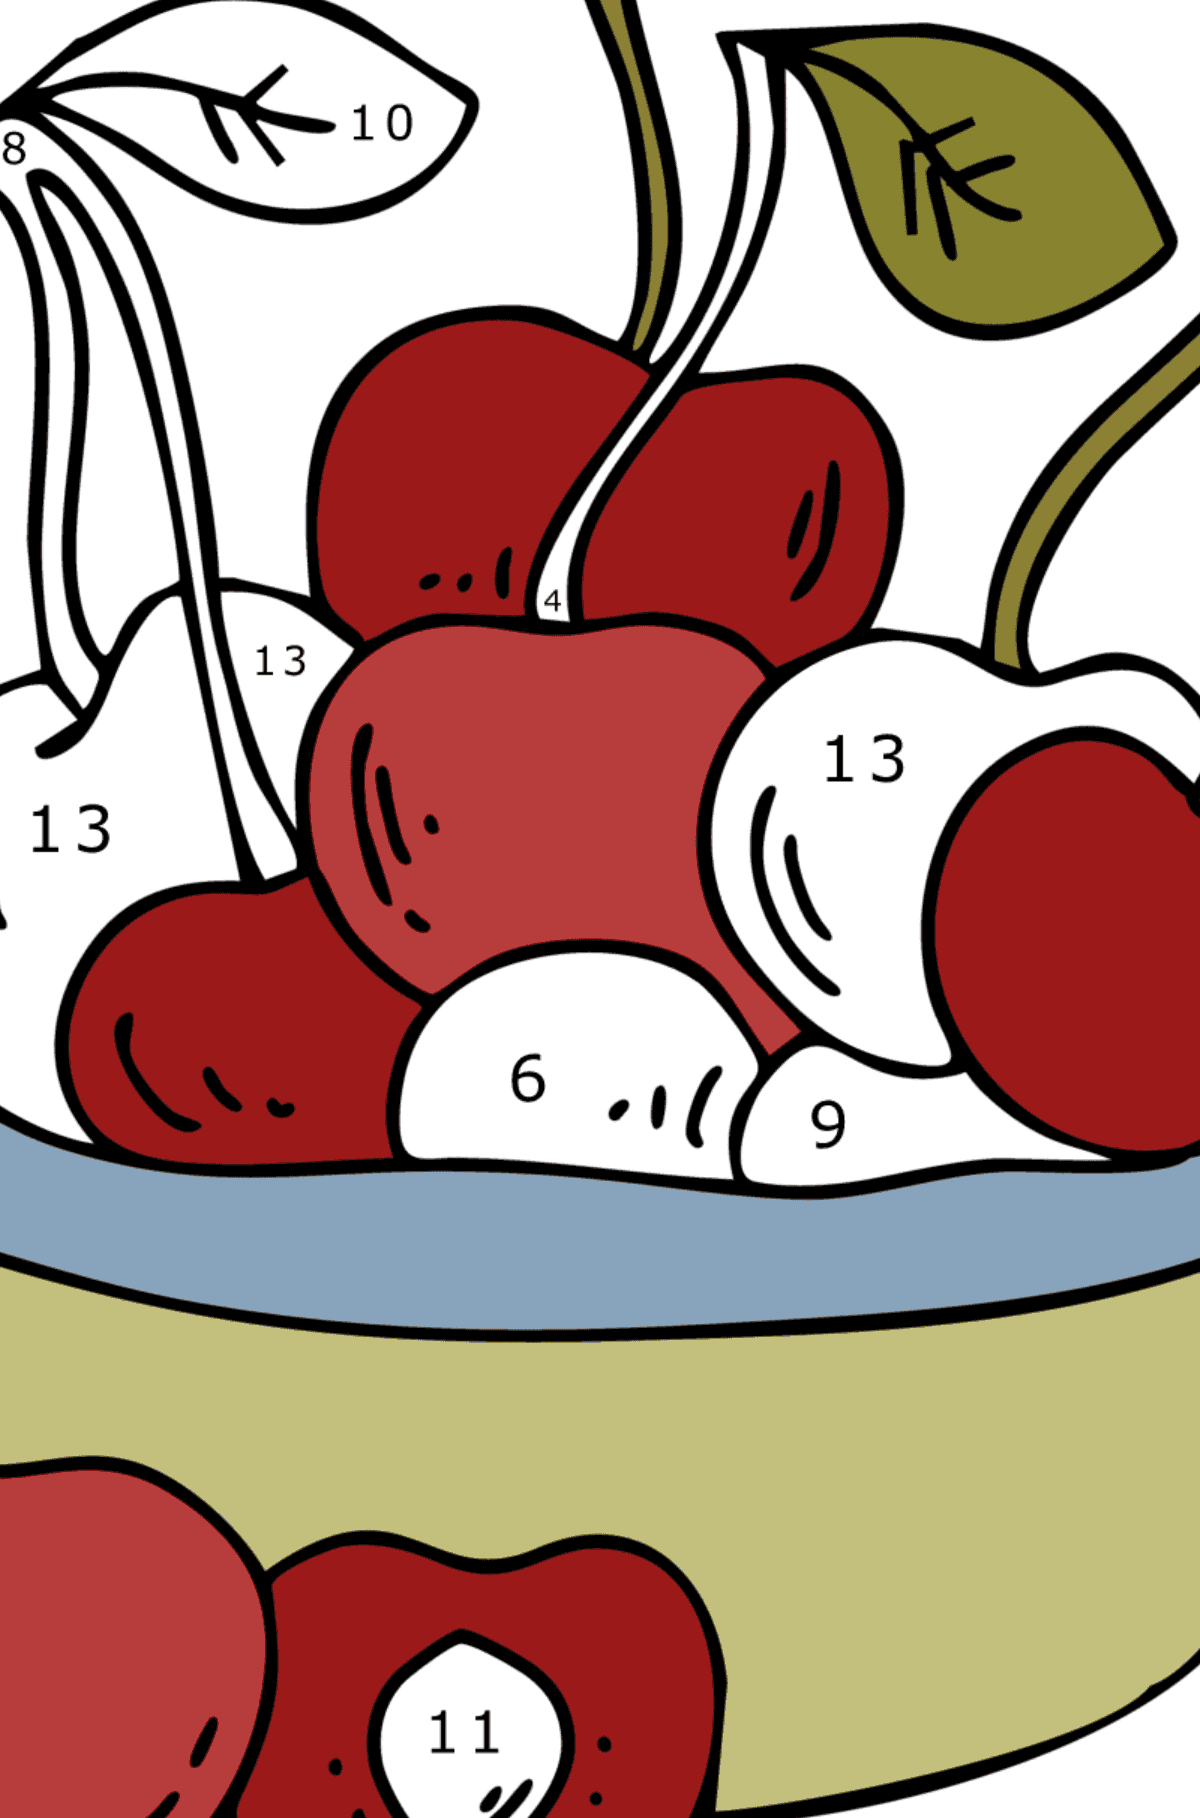 Cherries Plate Coloring Page - Coloring by Numbers for Kids